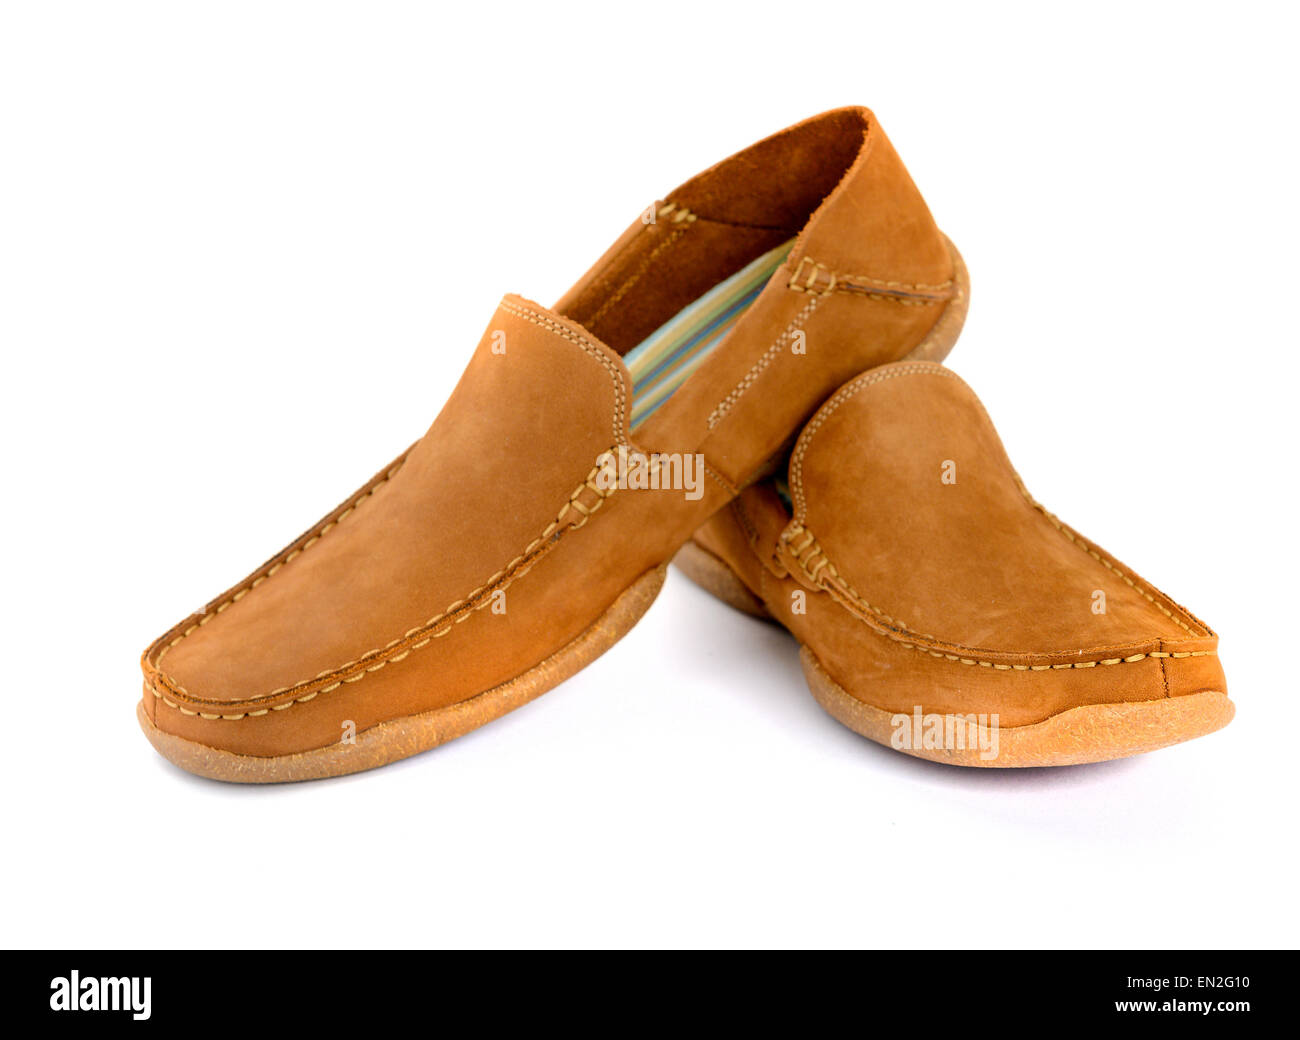 Male fashion shoes isolated Banque D'Images